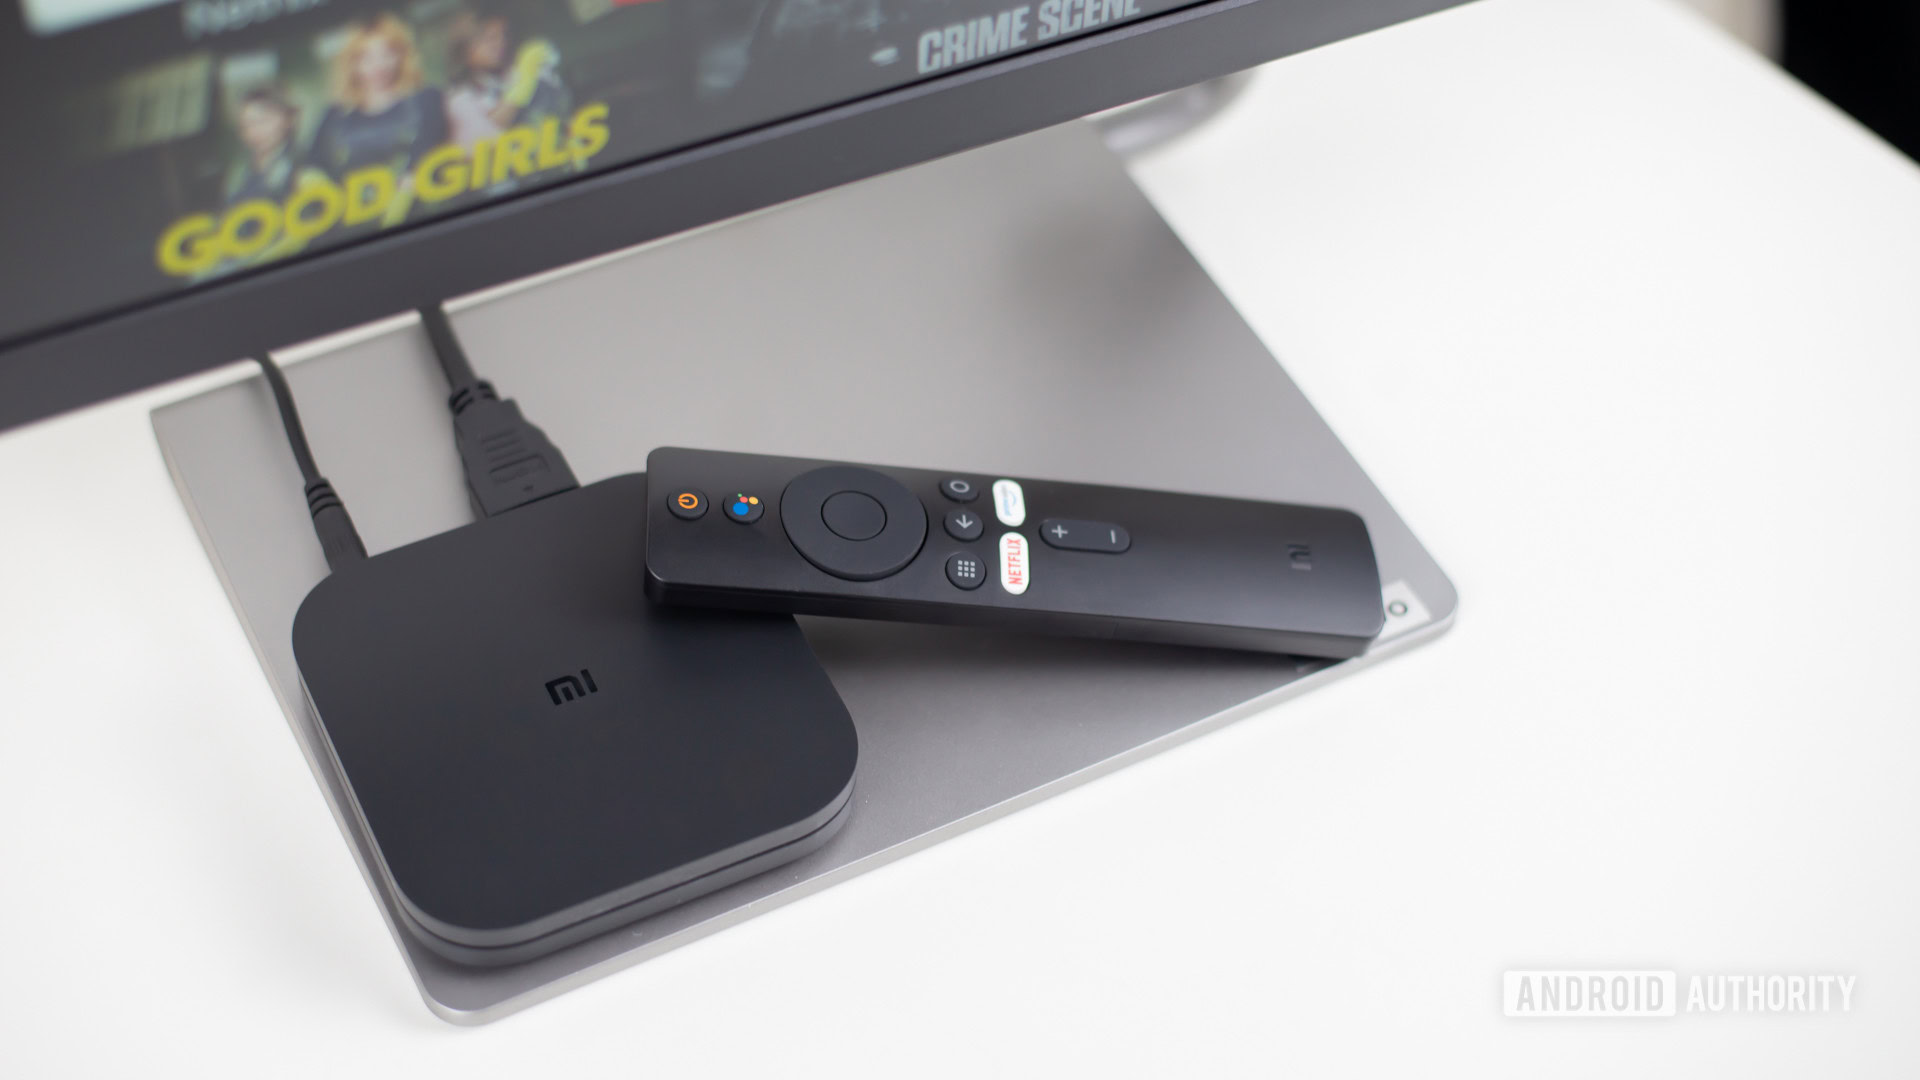 Mi Box S With Android TV Full Feature Review 